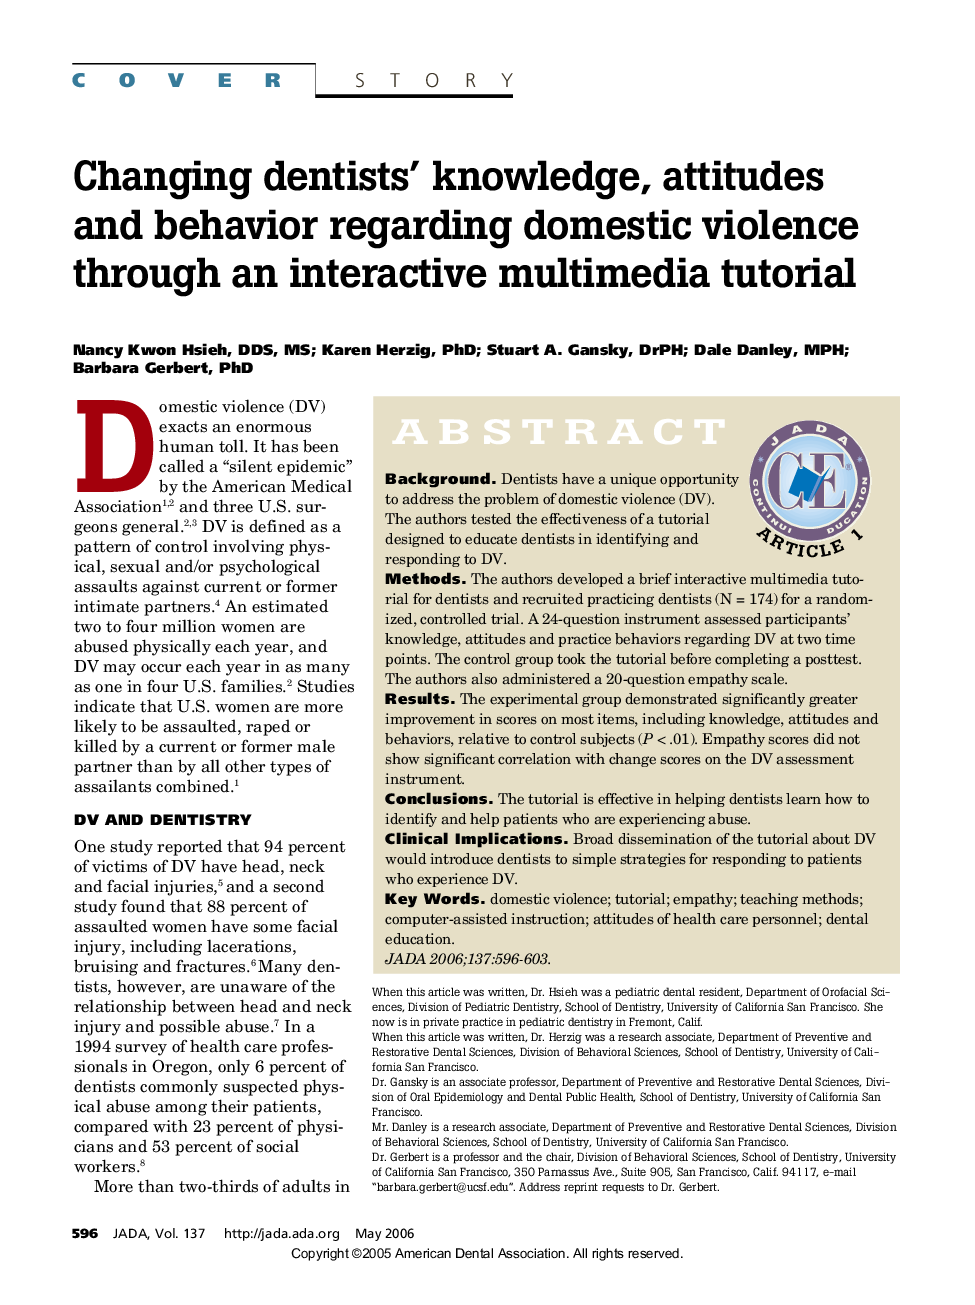 Changing dentists' knowledge, attitudes and behavior regarding domestic violence through an interactive multimedia tutorial